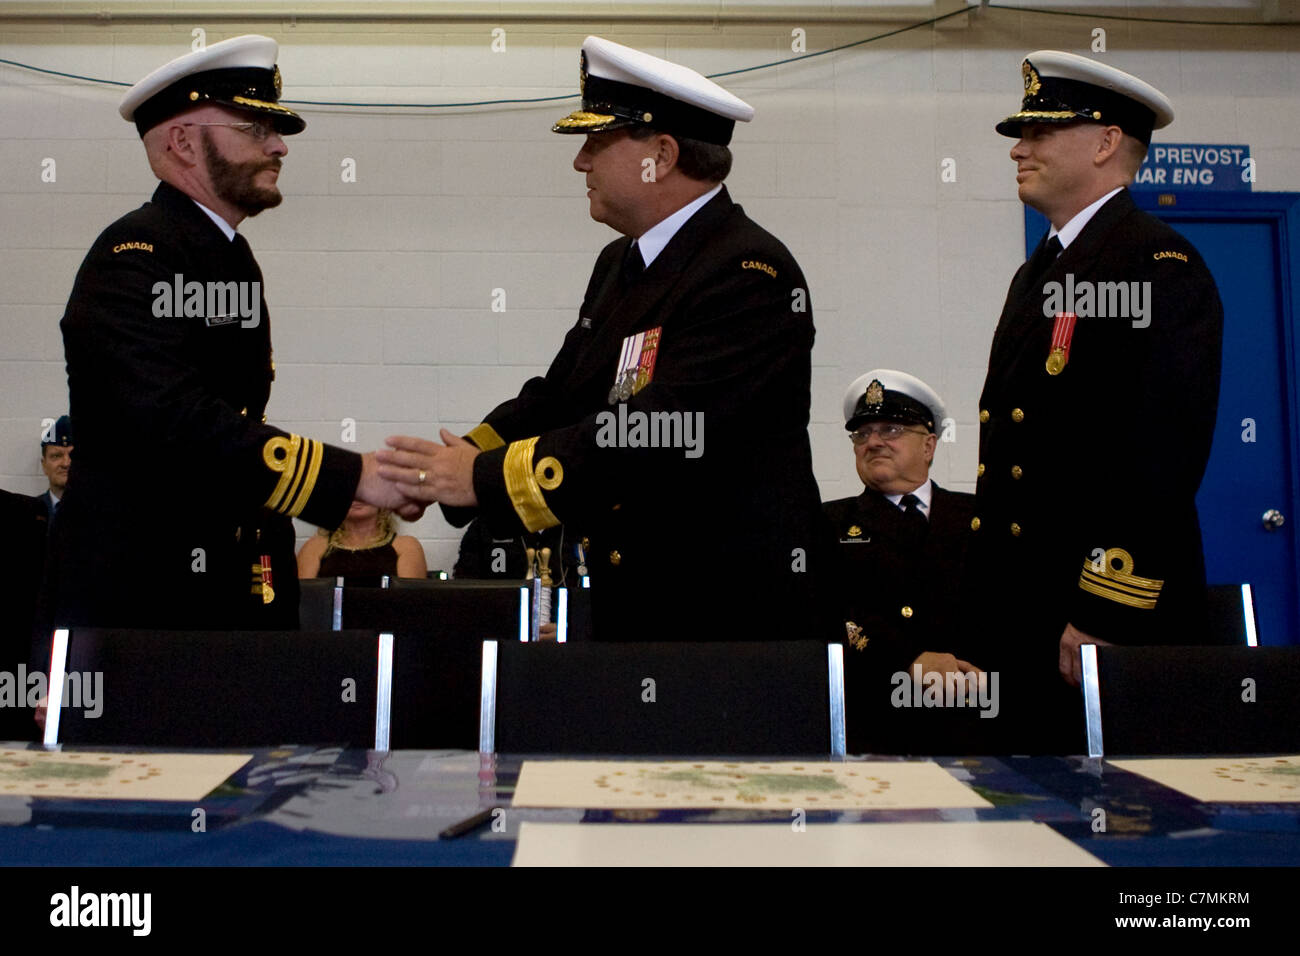 London Ontario, Canada. September 24, 2011. Change of Command ceremony at HMCS Prevost in London, Canada. Stock Photo